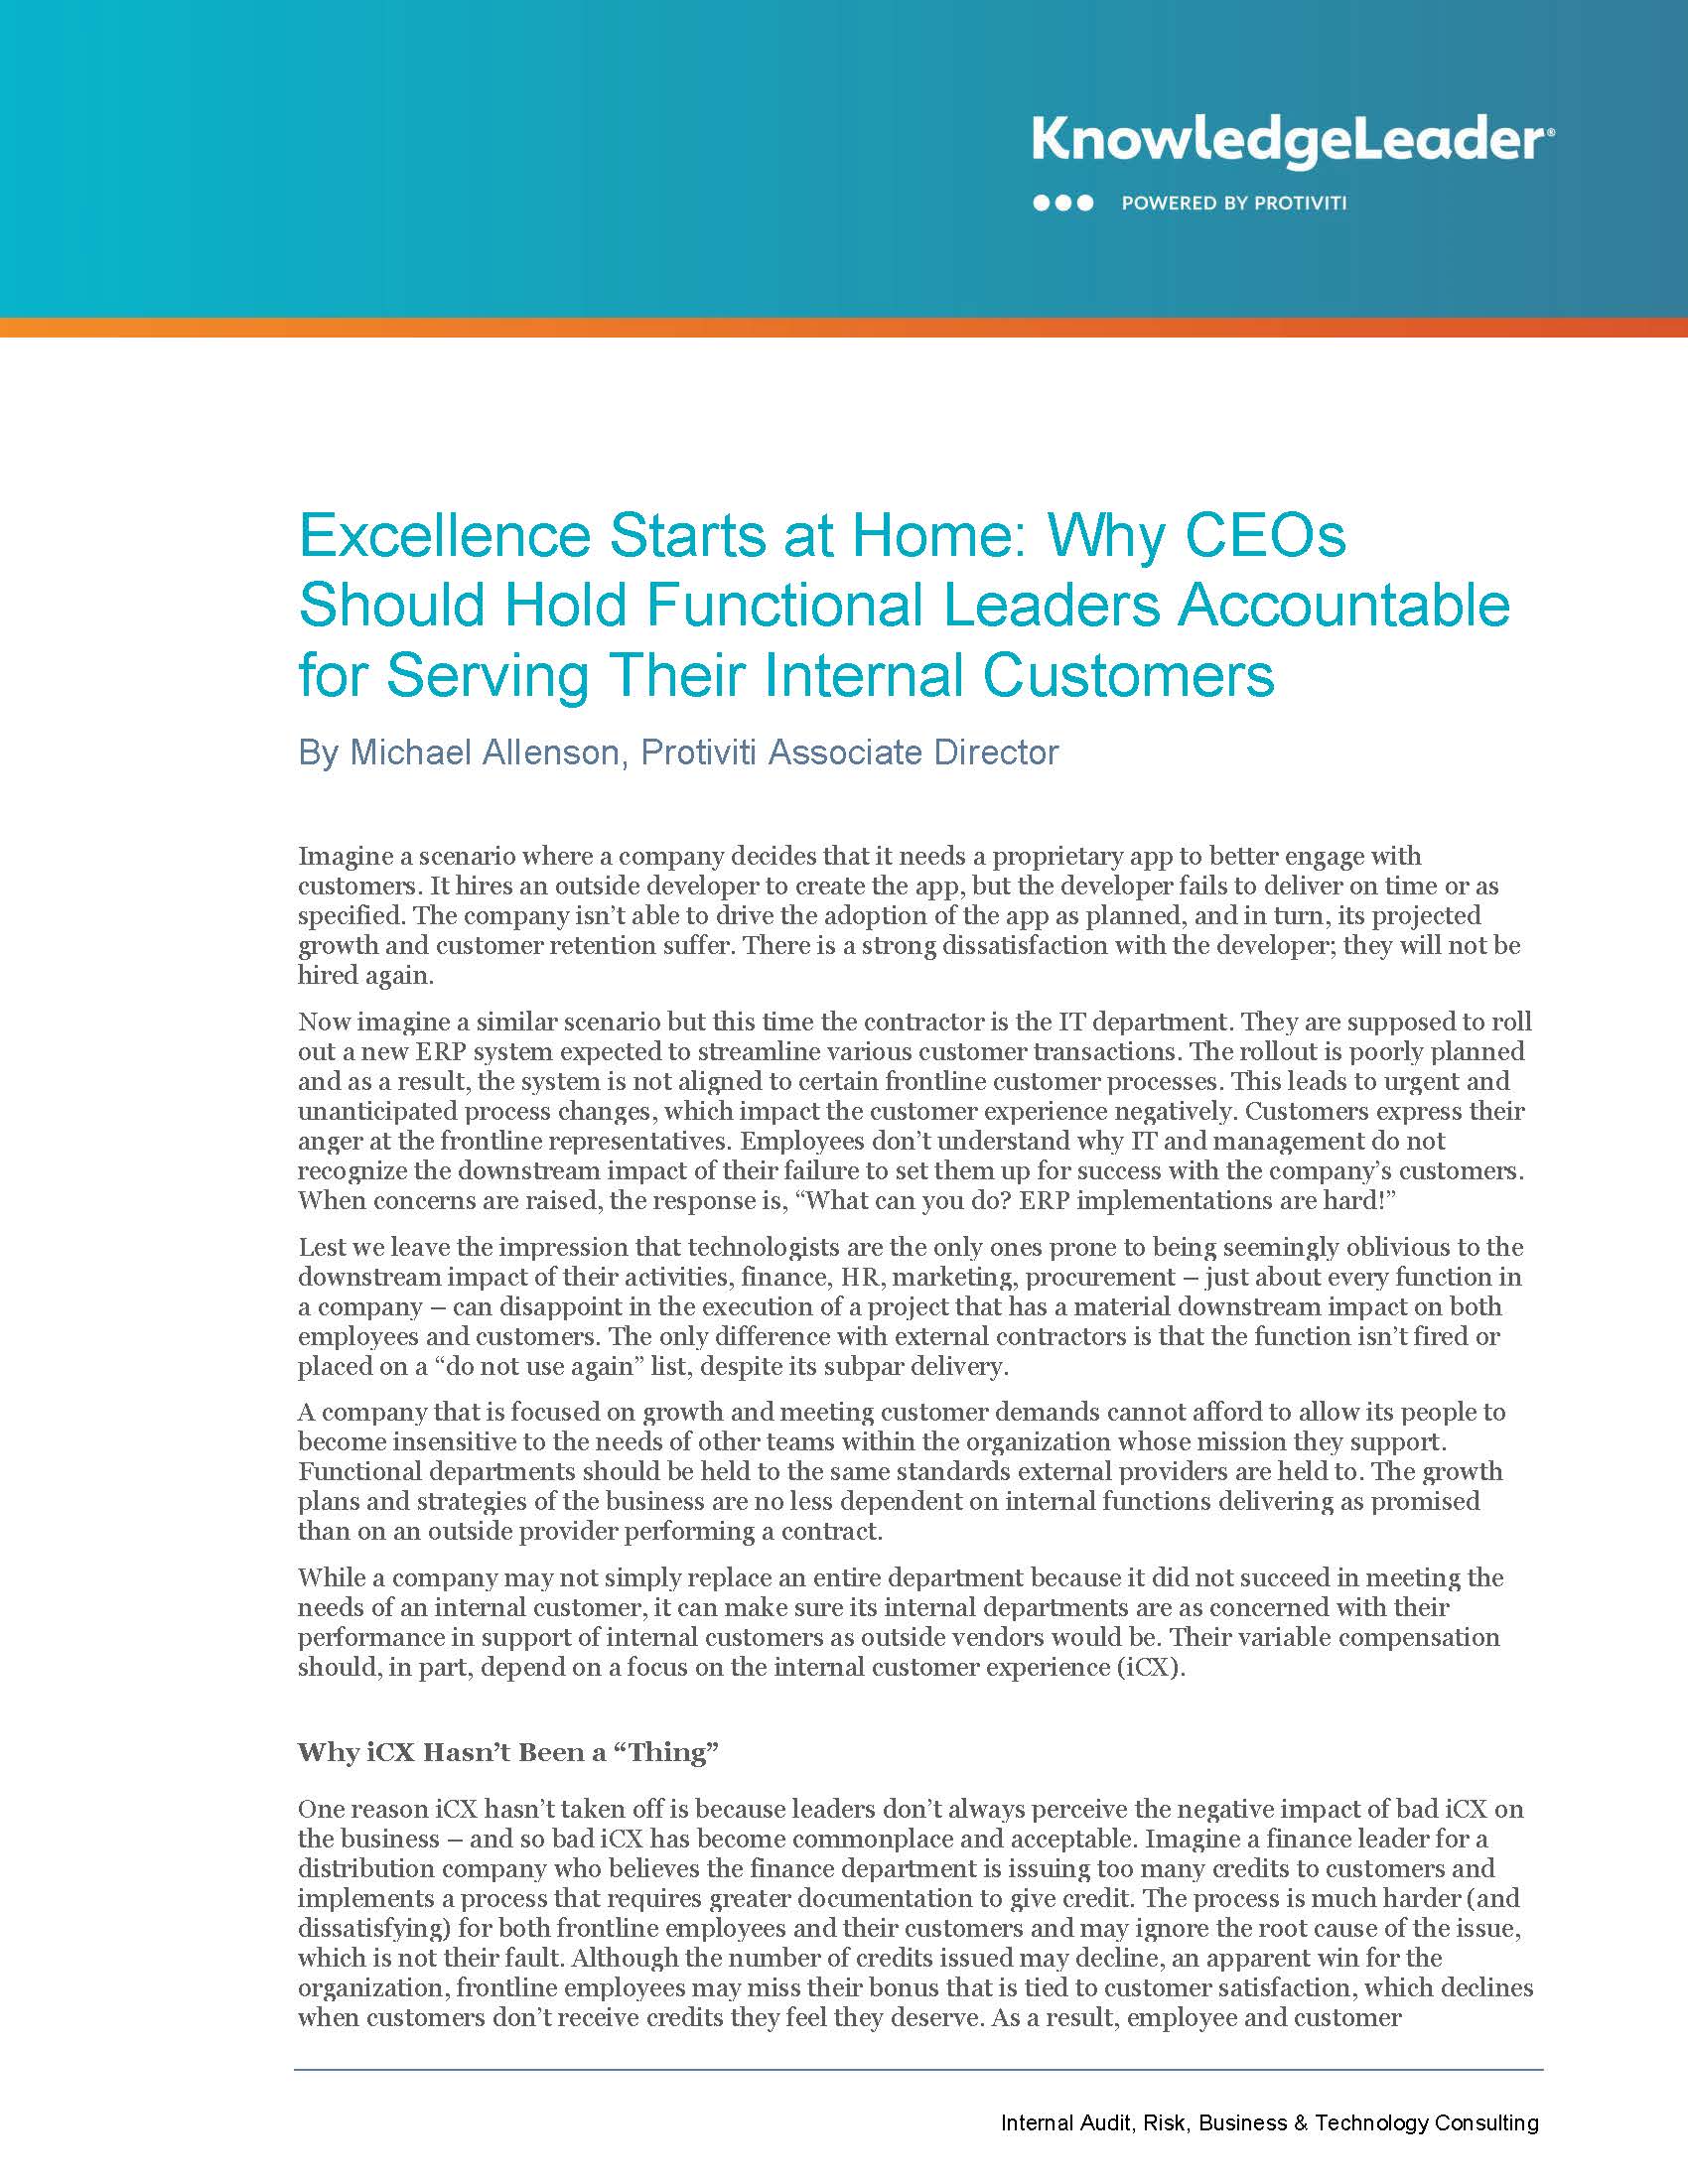 Screenshot of the first page of Excellence Starts at Home Why CEOs Should Hold Functional Leaders Accountable for Serving Their Internal Customers